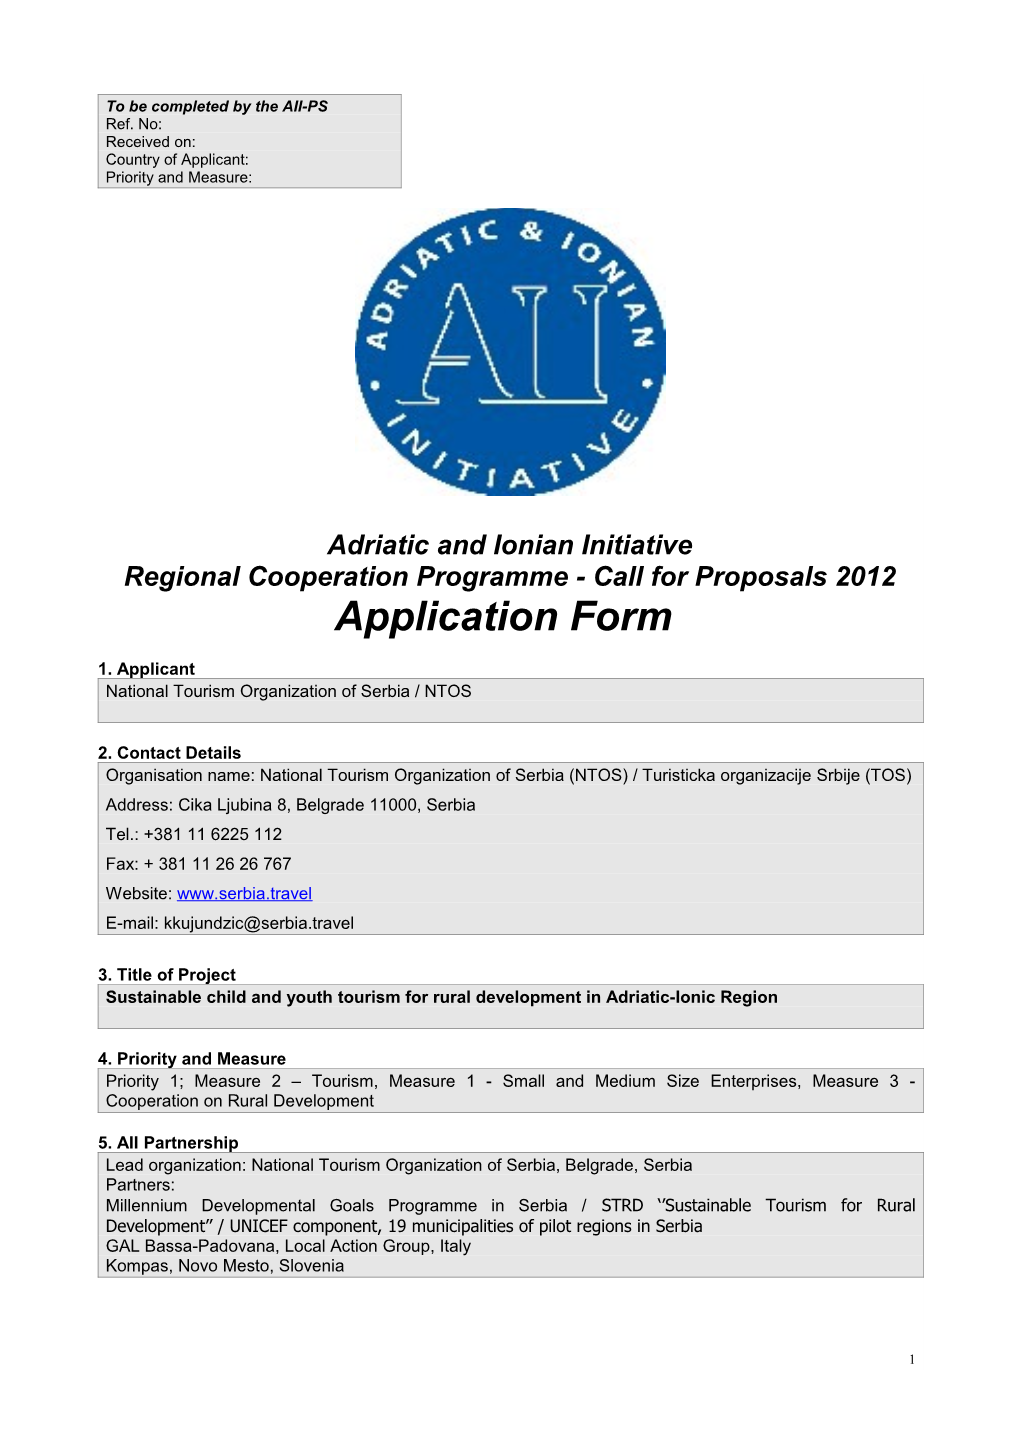 AII-RCP 2012 - Application Form